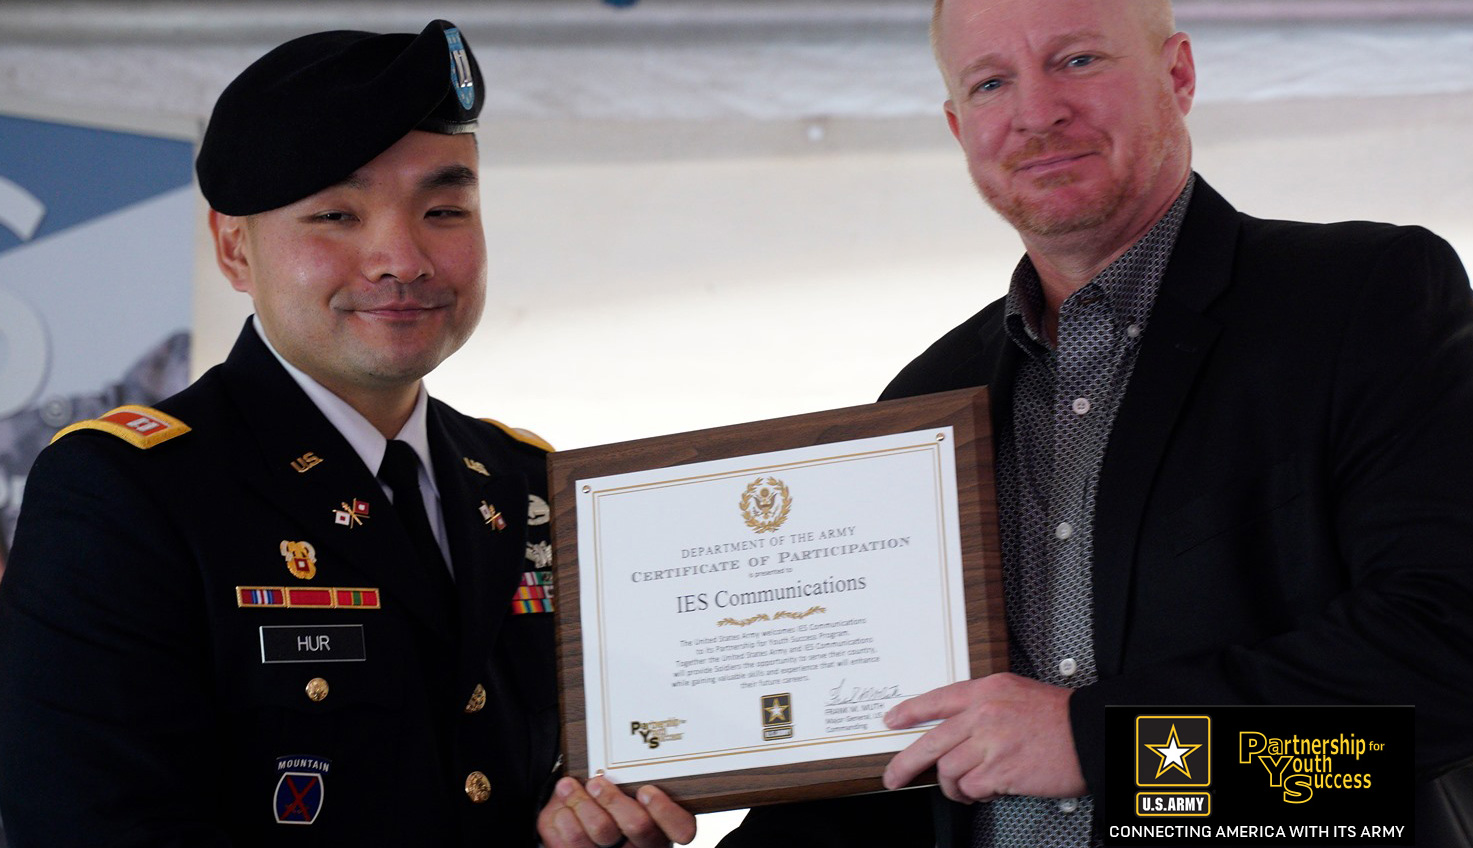 Ĵý Communications executive receives a certificate from a US Army official for participation in the US Army Partnership for Youth Success program